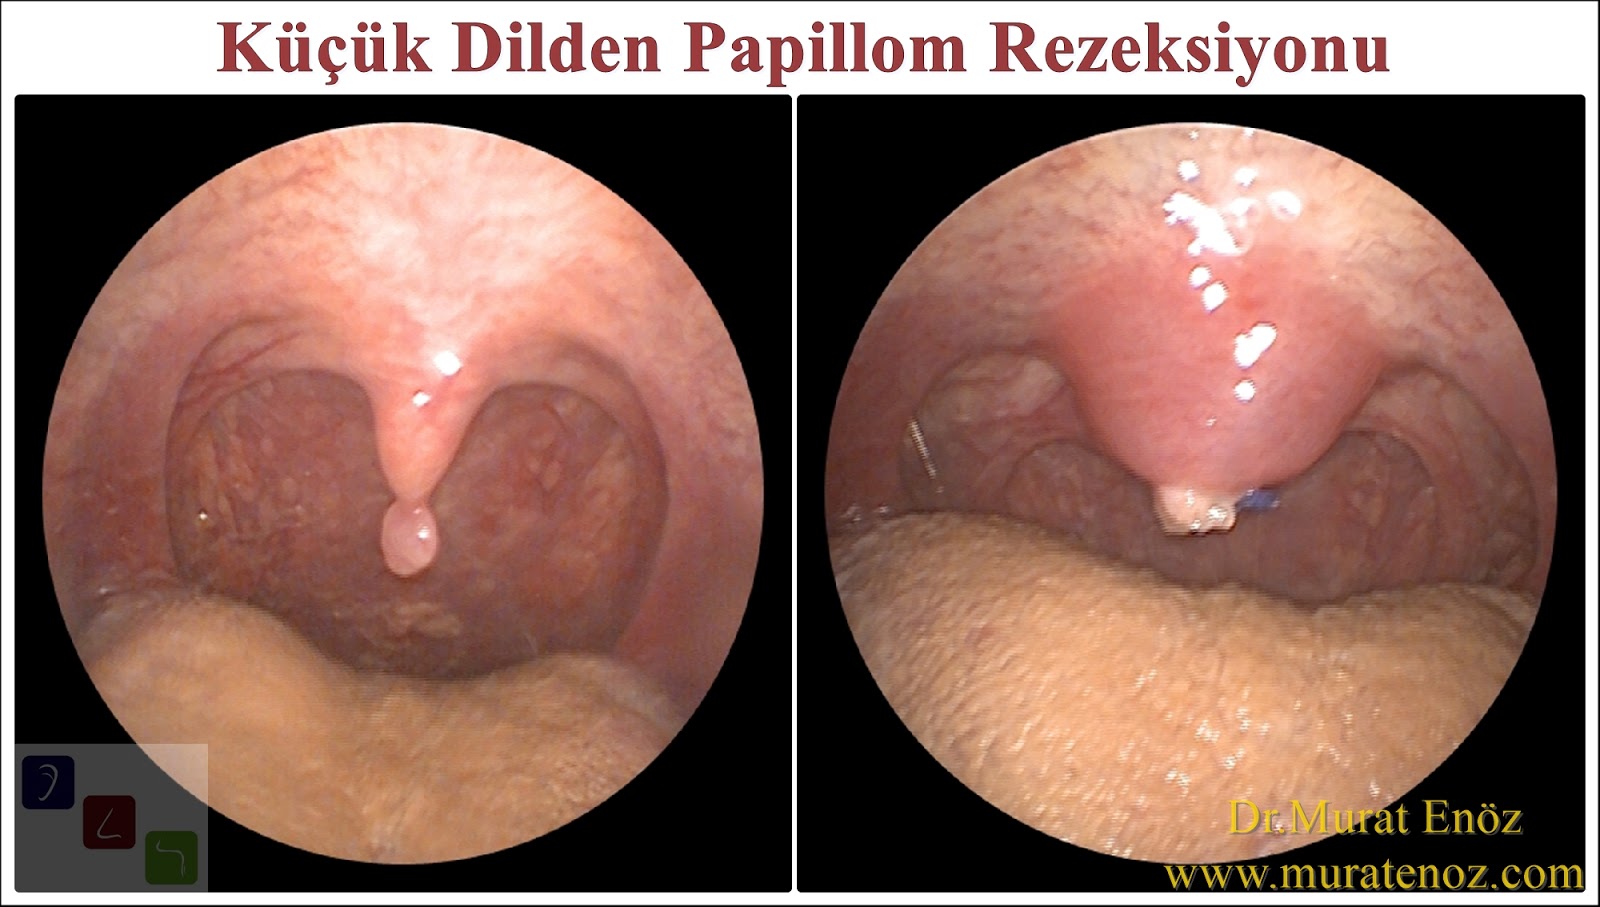 excision of uvula papilloma cpt code)